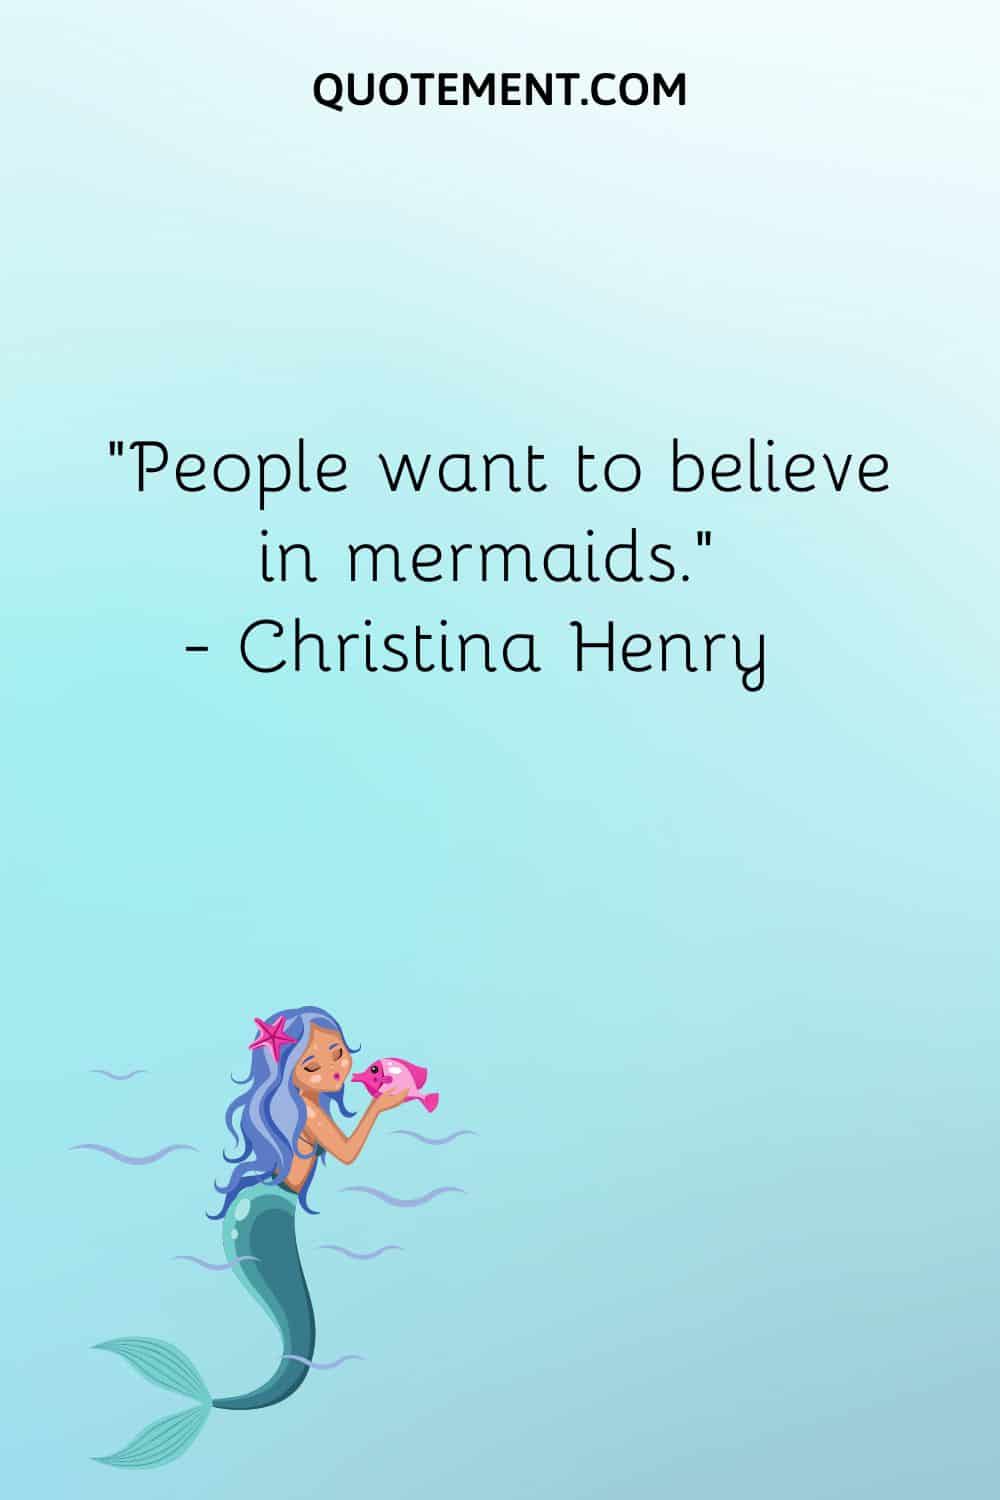 “People want to believe in mermaids.” — Christina Henry